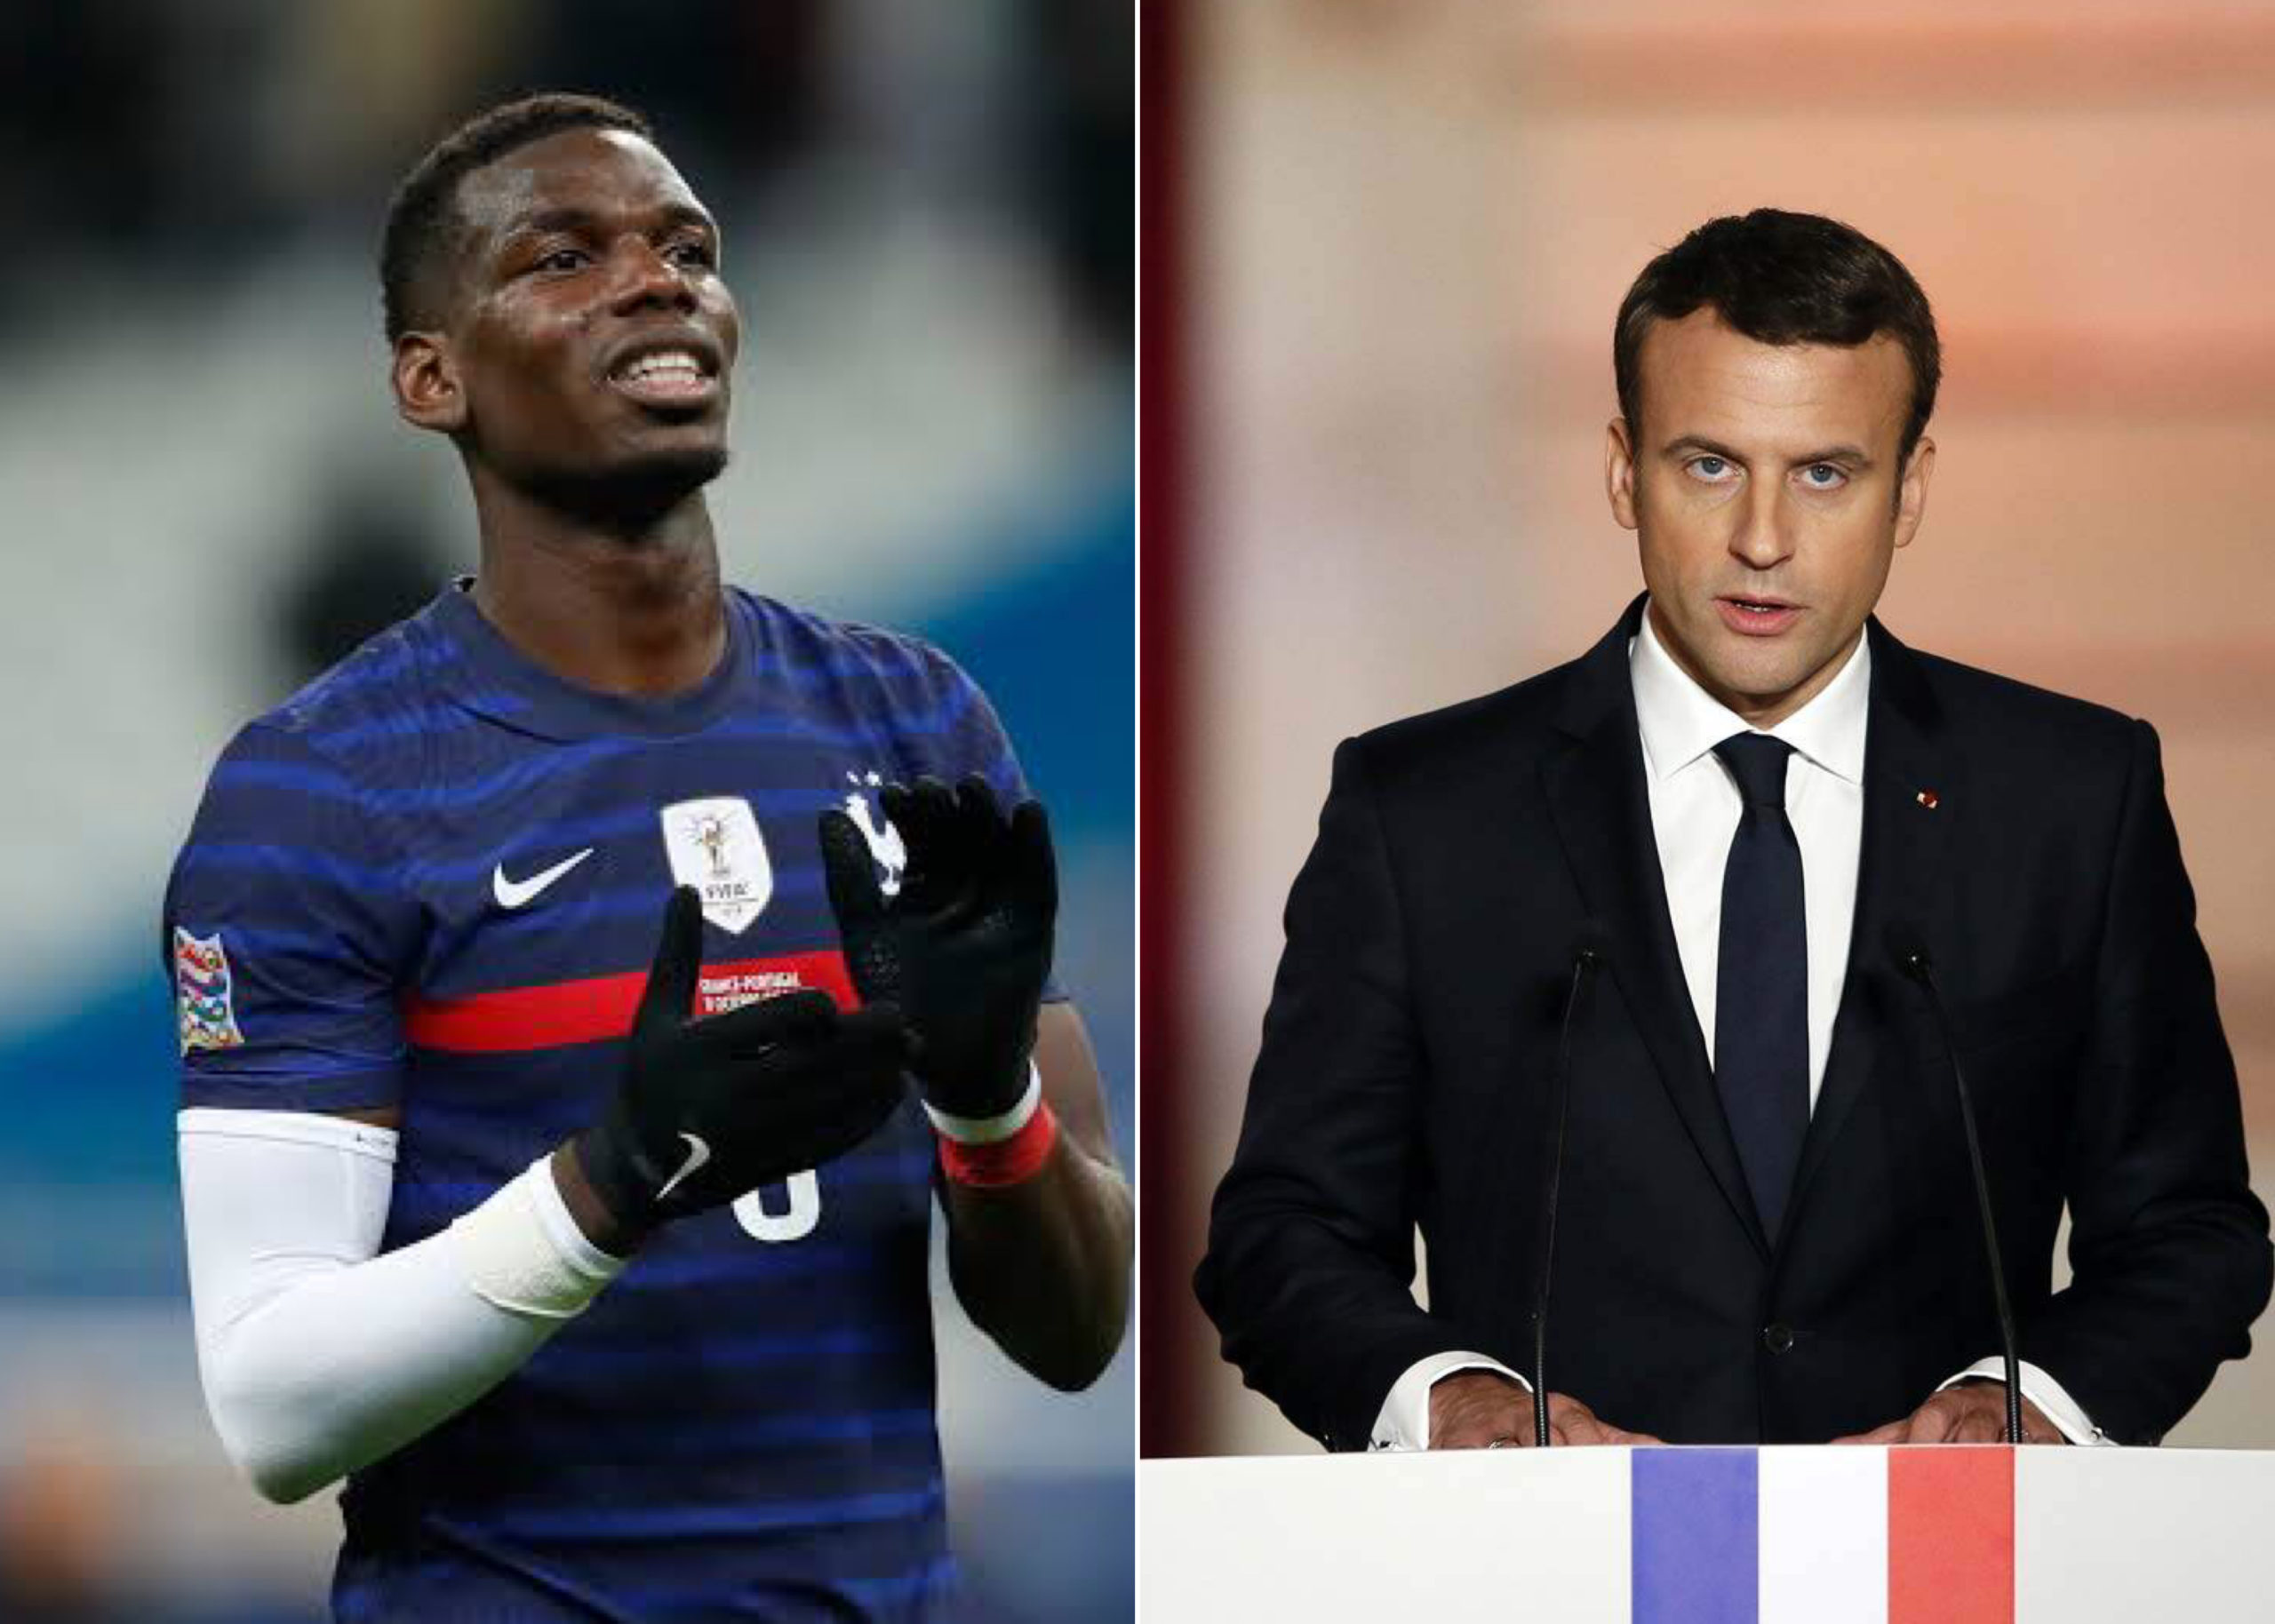 Paul Pogba Denies Reports Of Quitting France National Team Over President Macron's Comments On 'Islamist Terrorism'